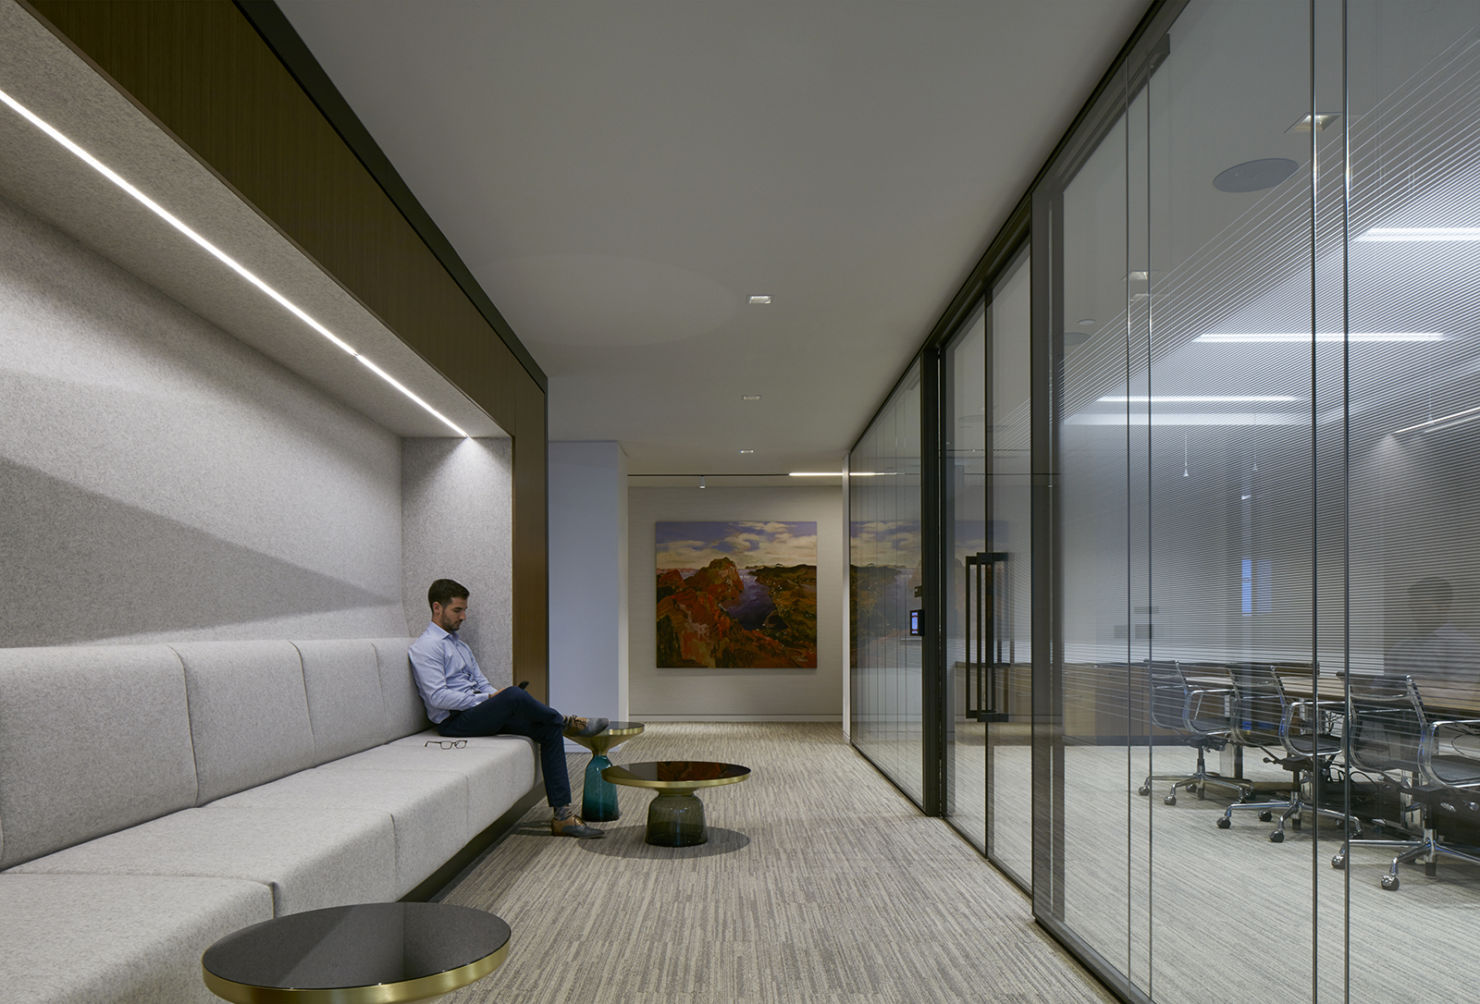 Deloitte's Toronto Office uses meeting rooms booking software to better manage their space